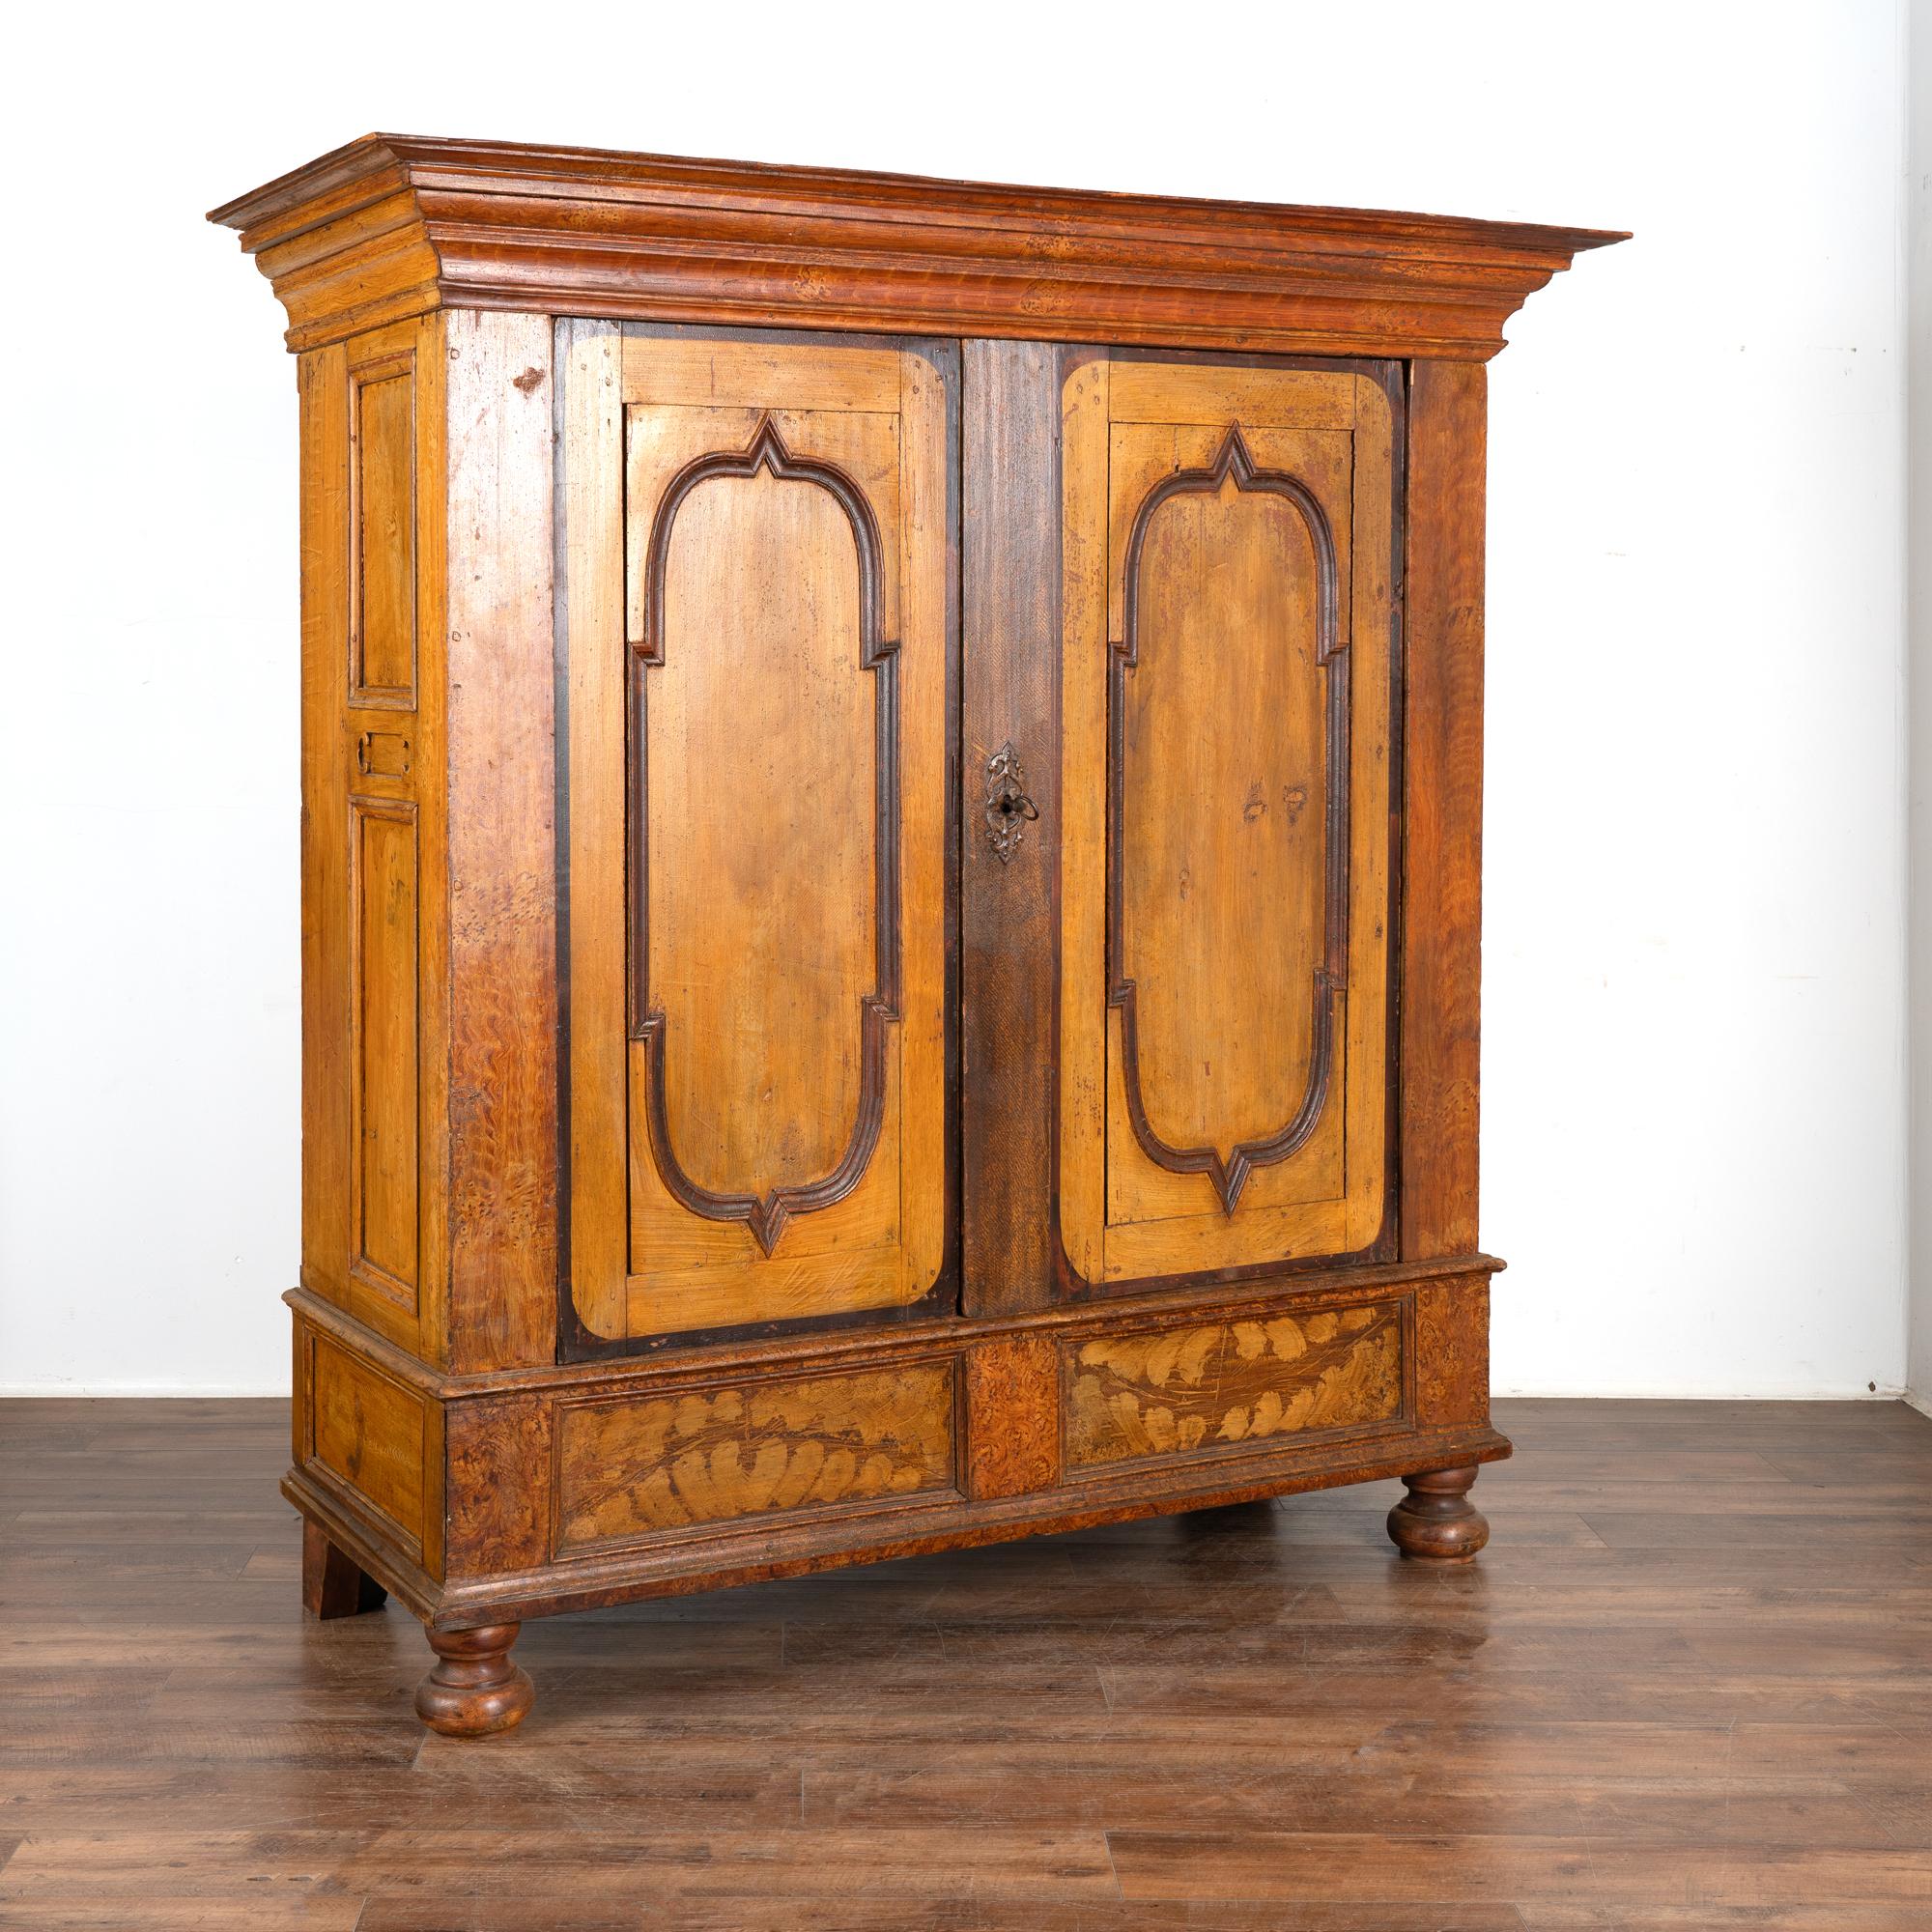 Take note of the exceptional original faux wood painted finish on this stately pine armoire which dates back to the late 1700's into early 1800's. 
Please examine the close up photos to appreciate the warm colors, texture and patina of this